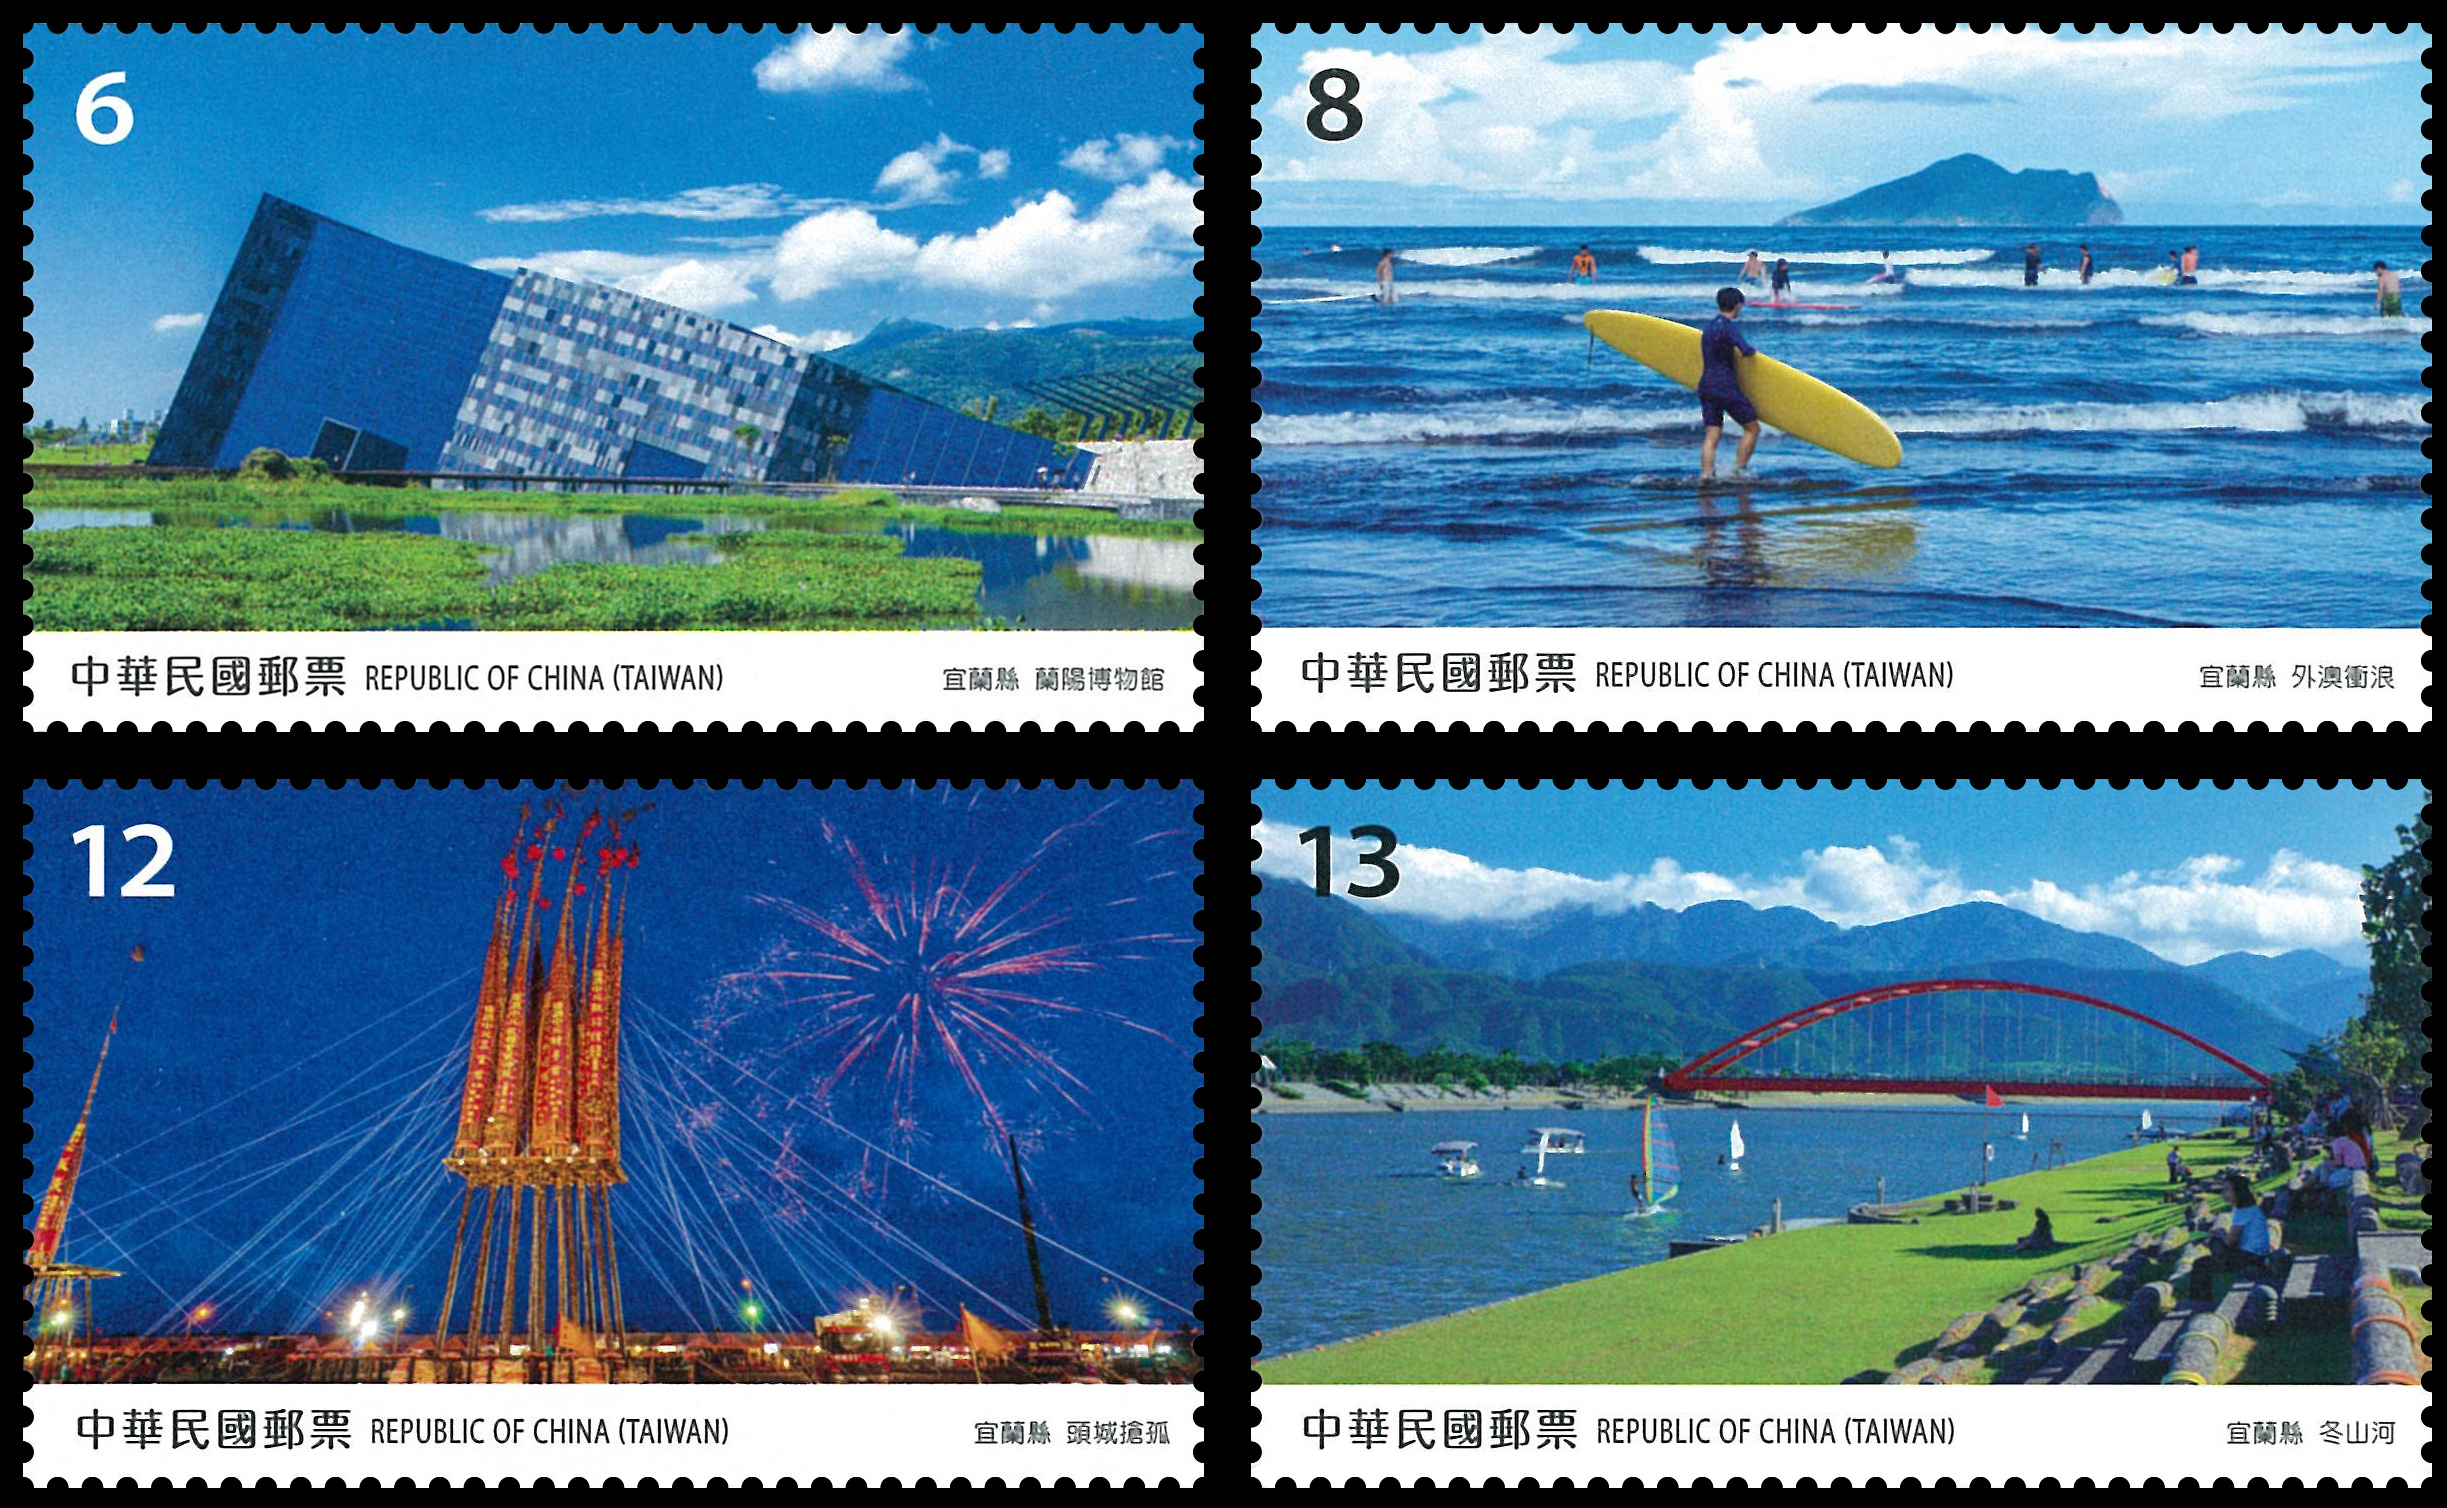 Taiwan Scenery Postage Stamps — Yilan County